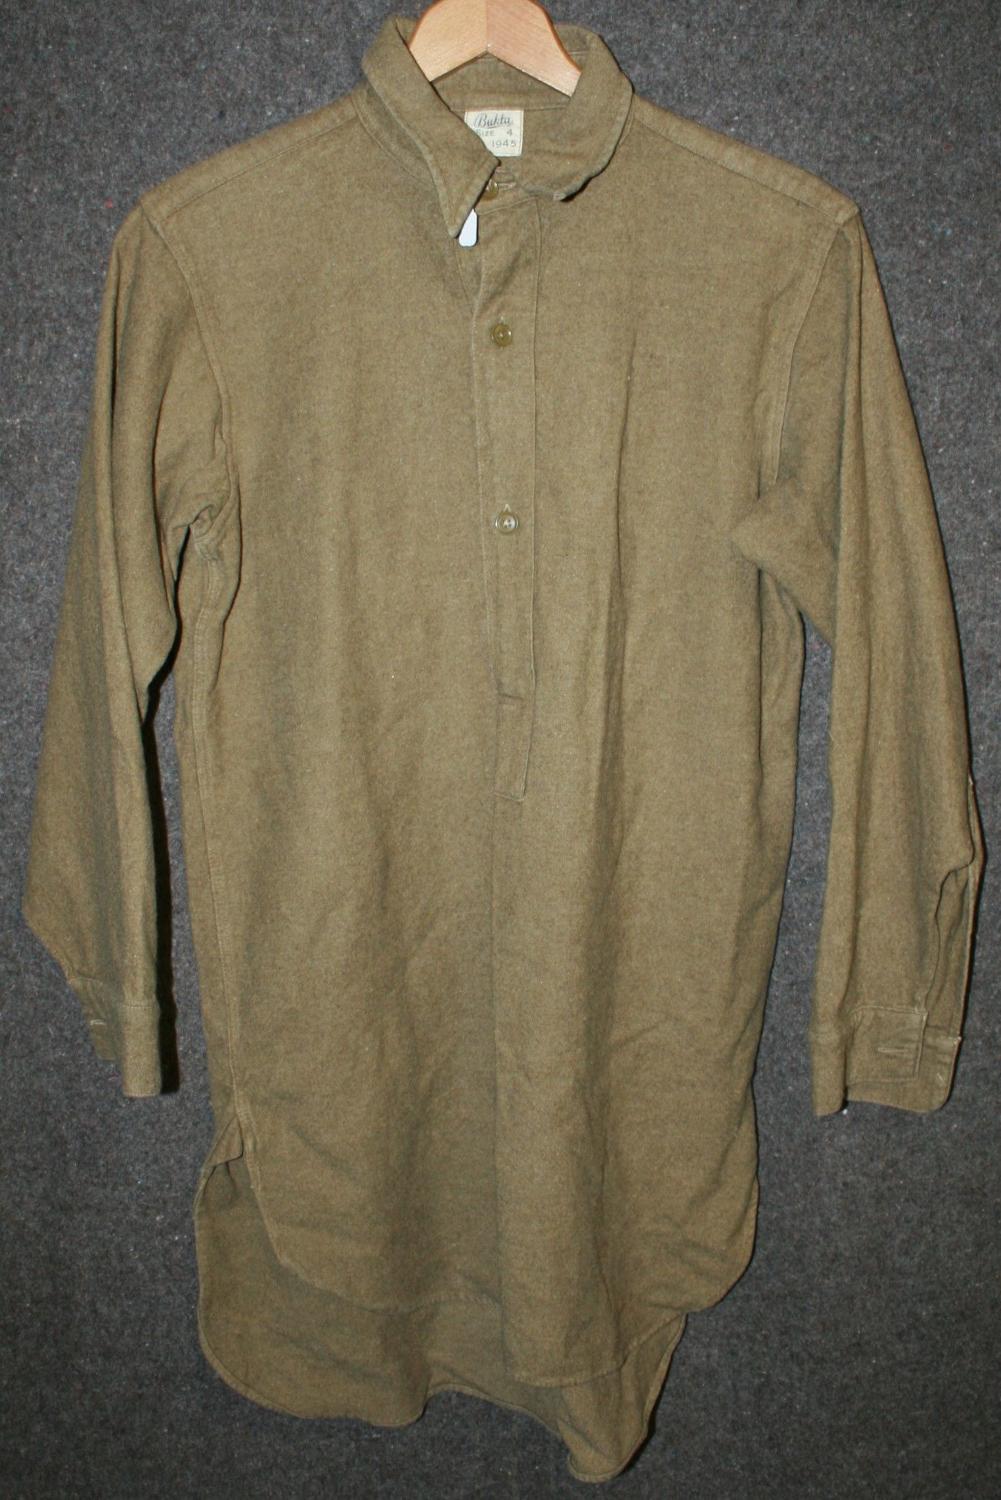 A 1945 DATED COLLAR ATTACHED SHIRT